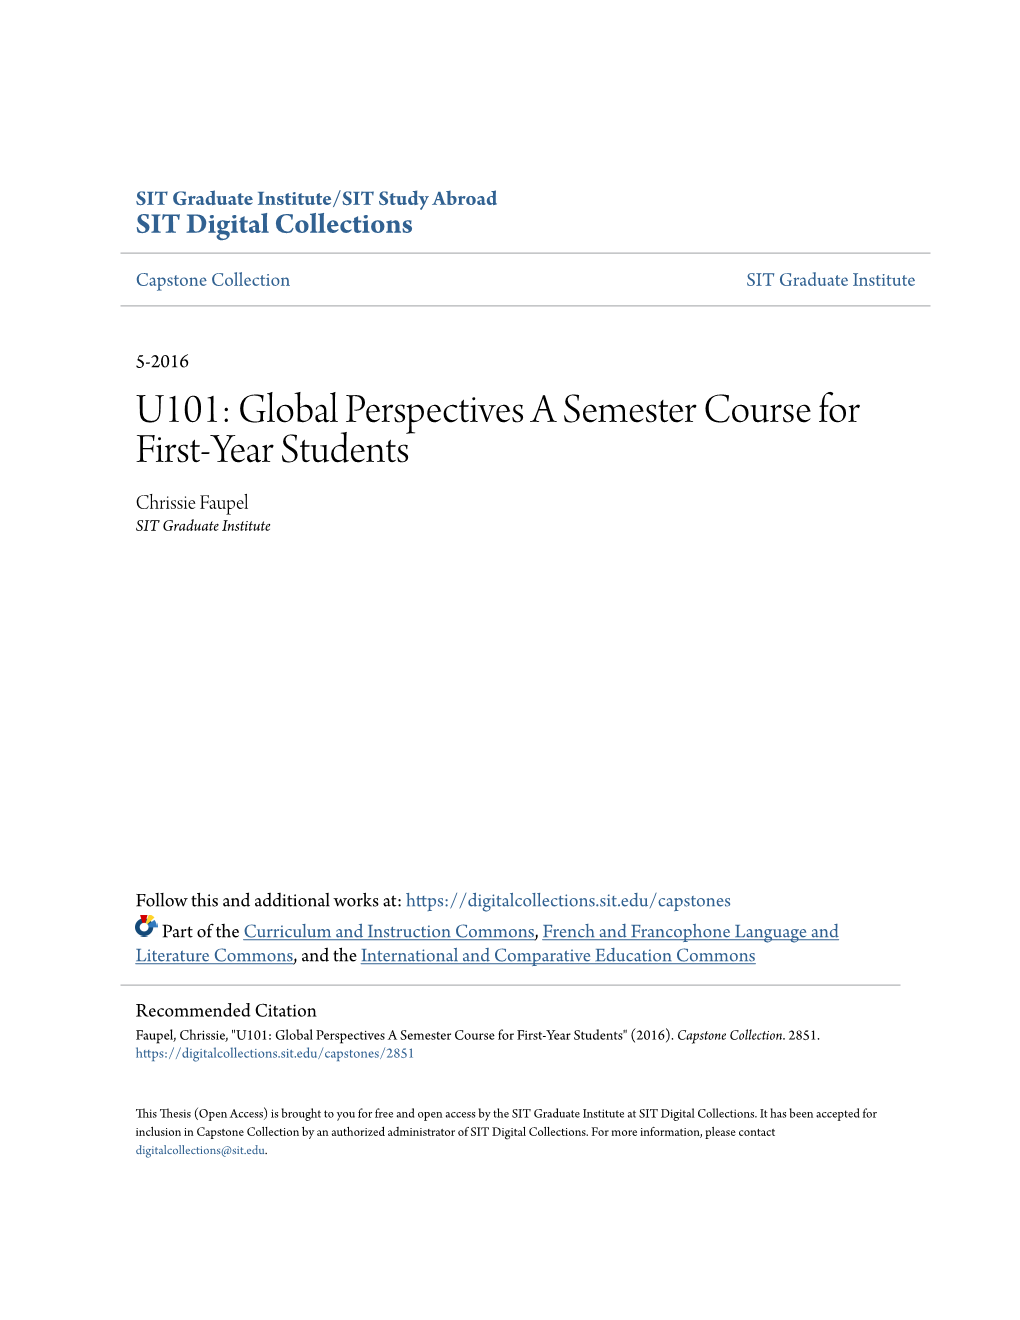 Global Perspectives a Semester Course for First-Year Students Chrissie Faupel SIT Graduate Institute